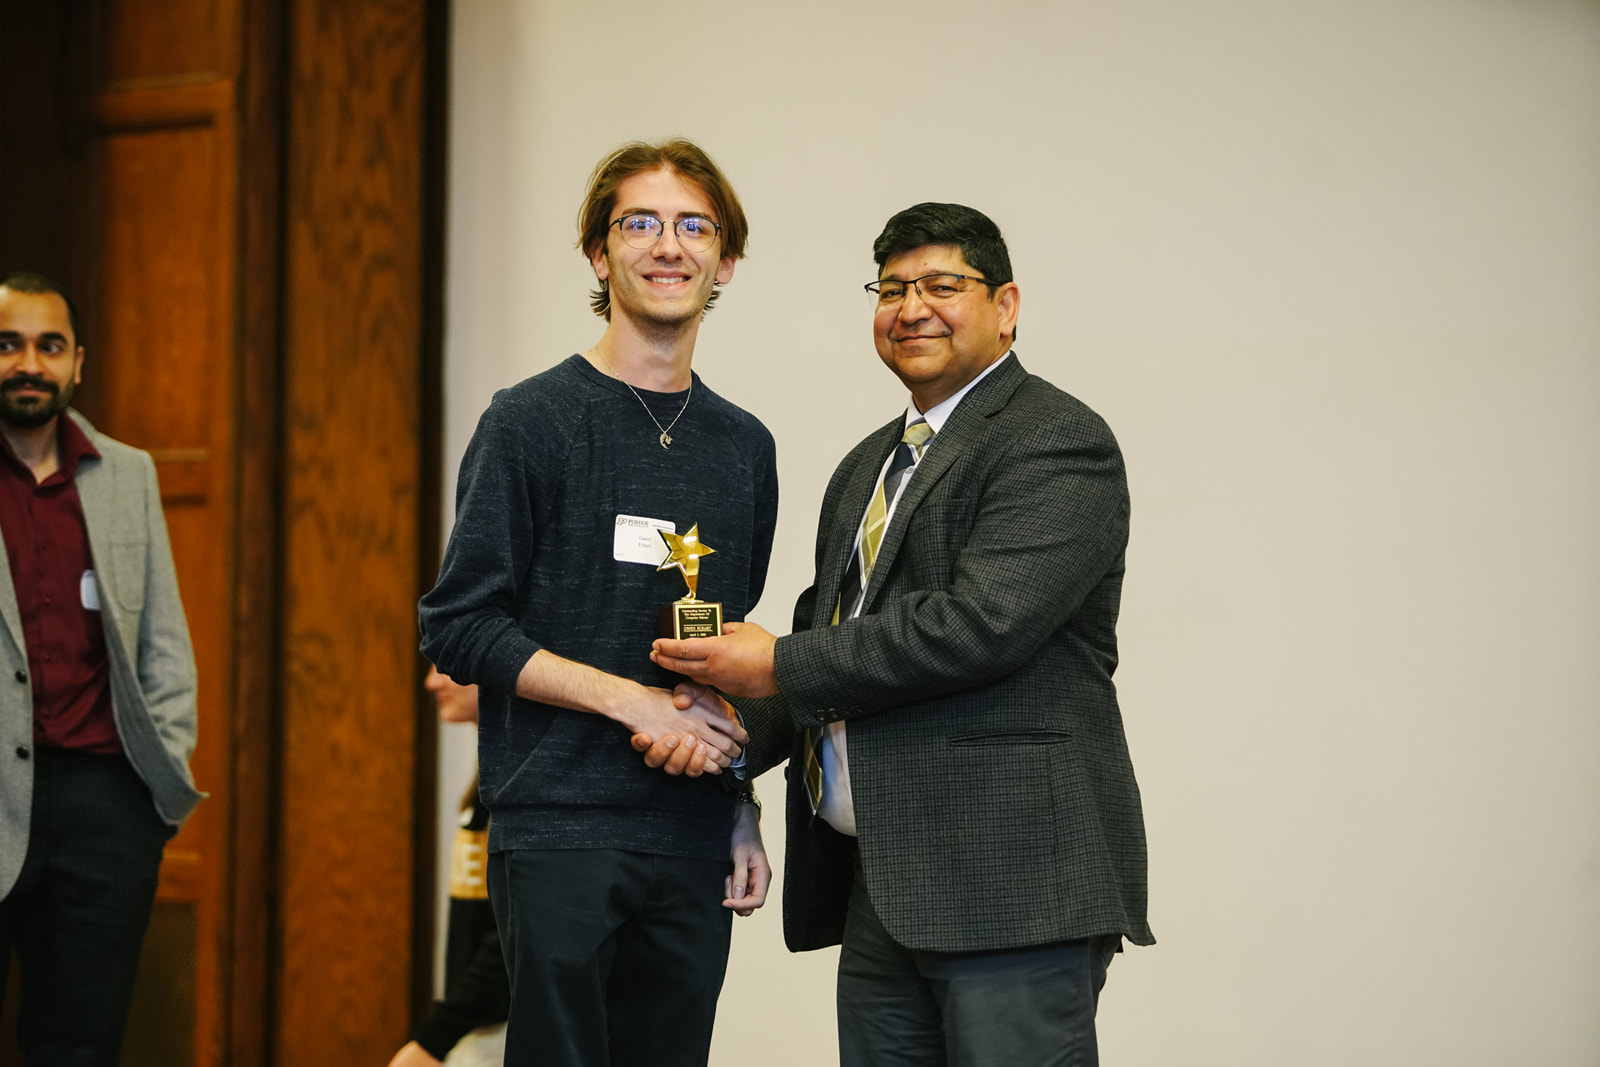 Owen Eckart won the Outstanding Service to the Department by a Student Award